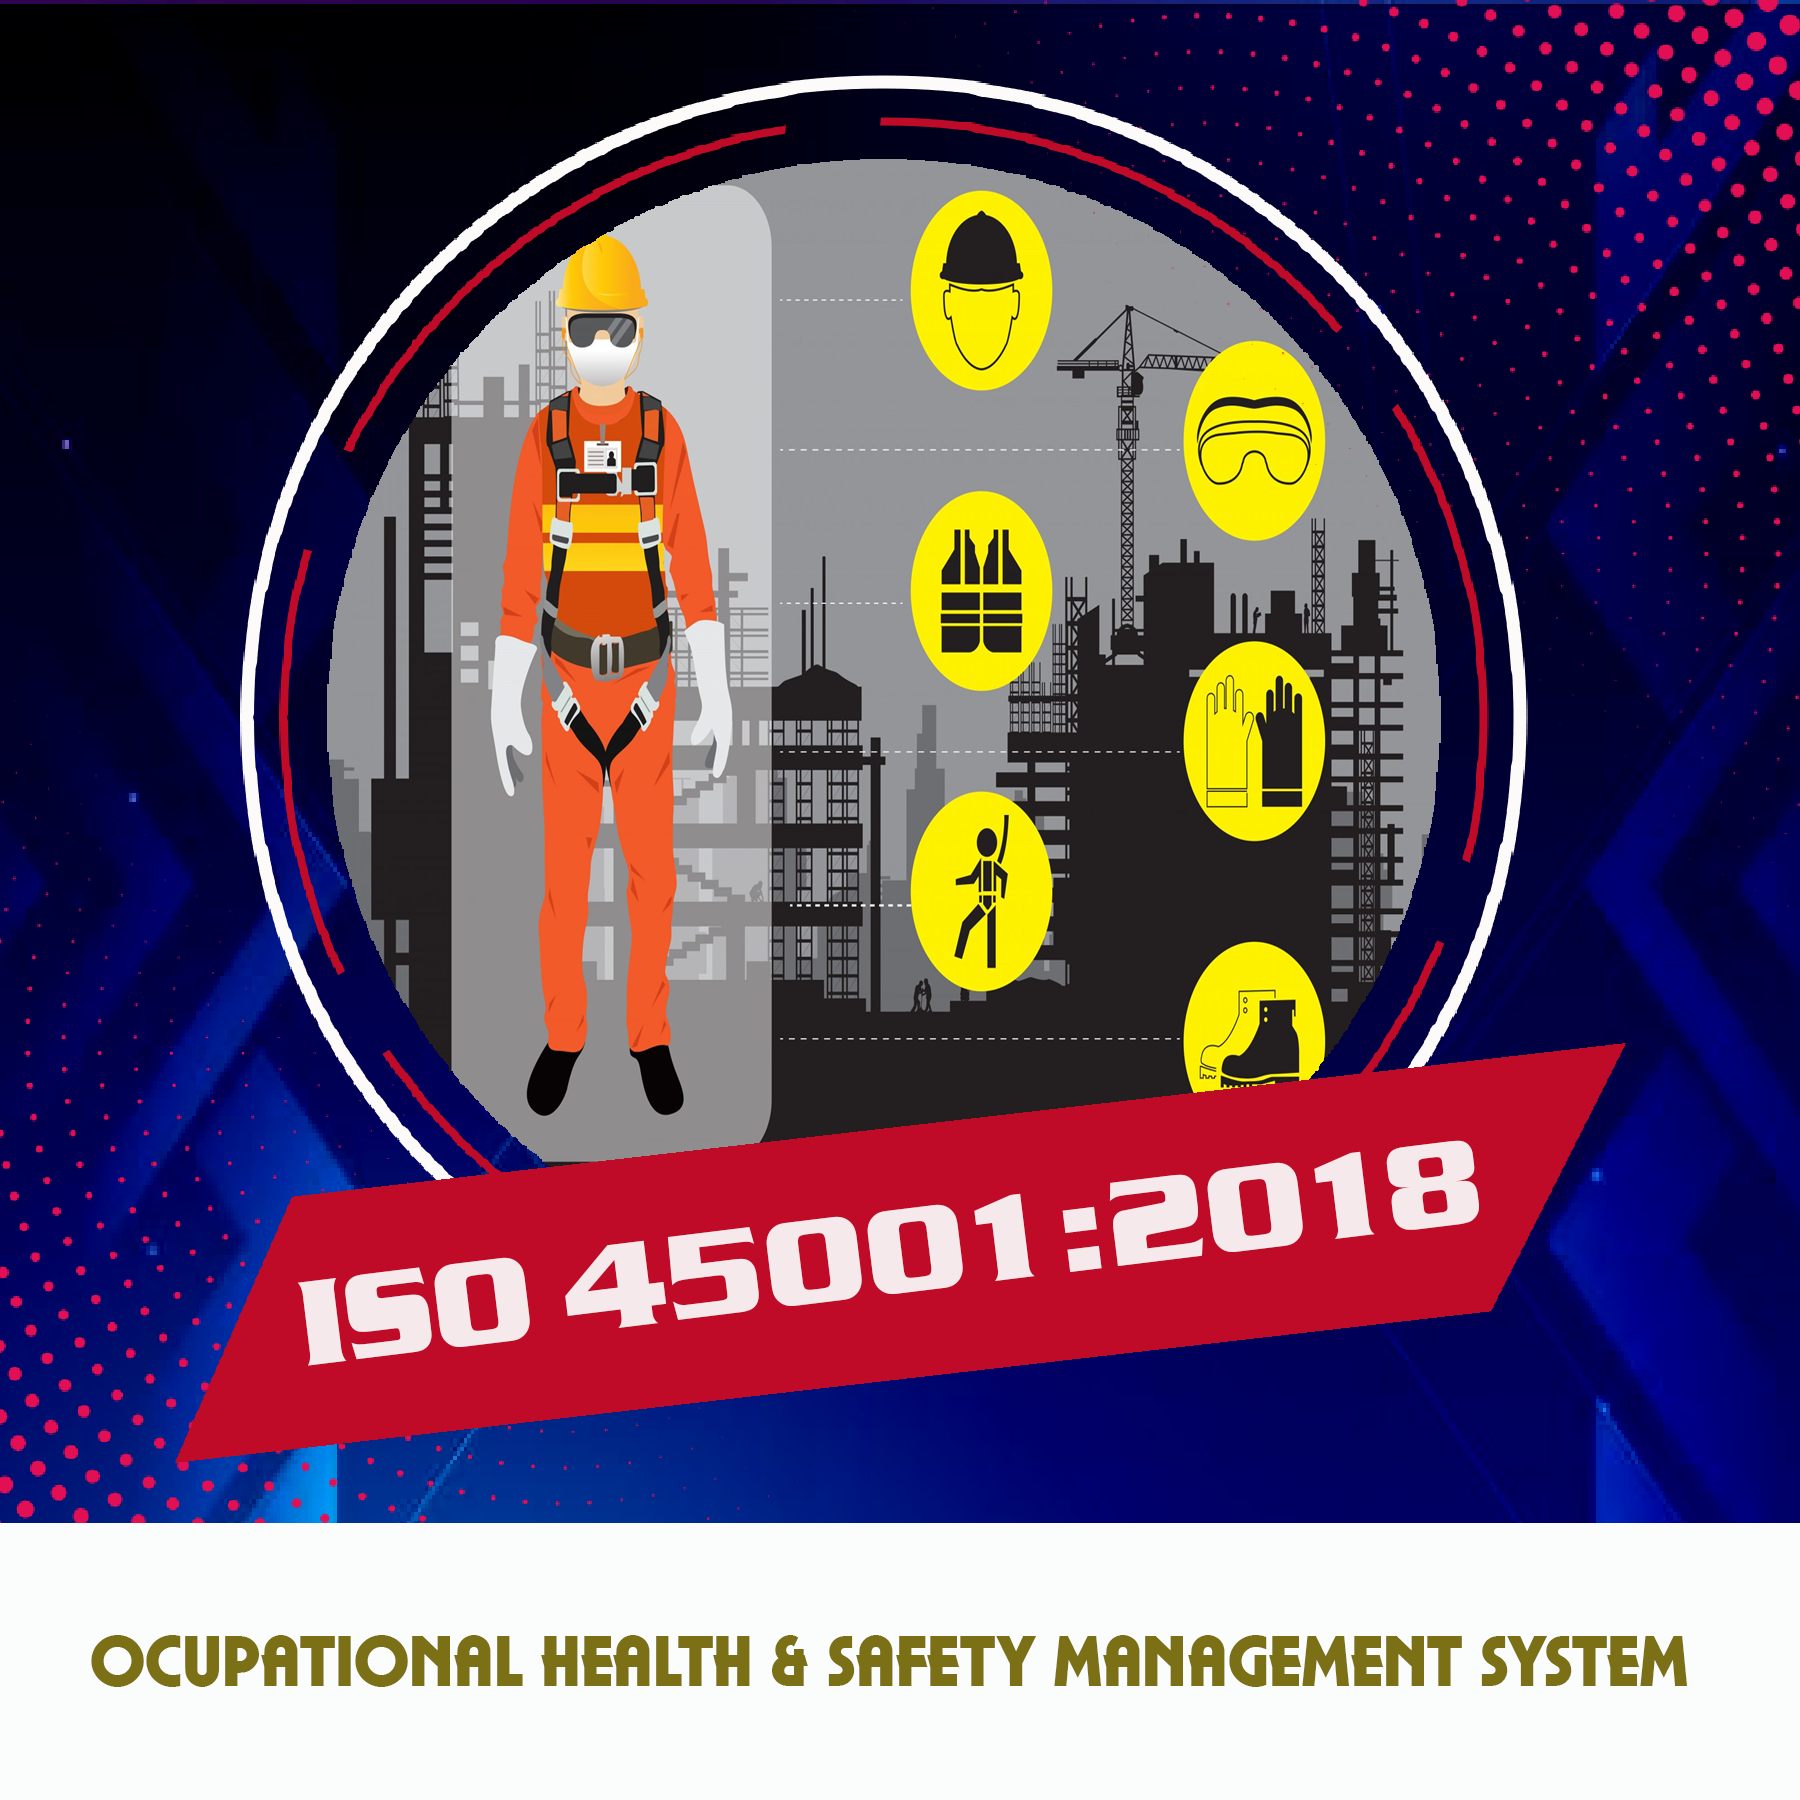 Occupational Health and Safety (OH&S) Management System